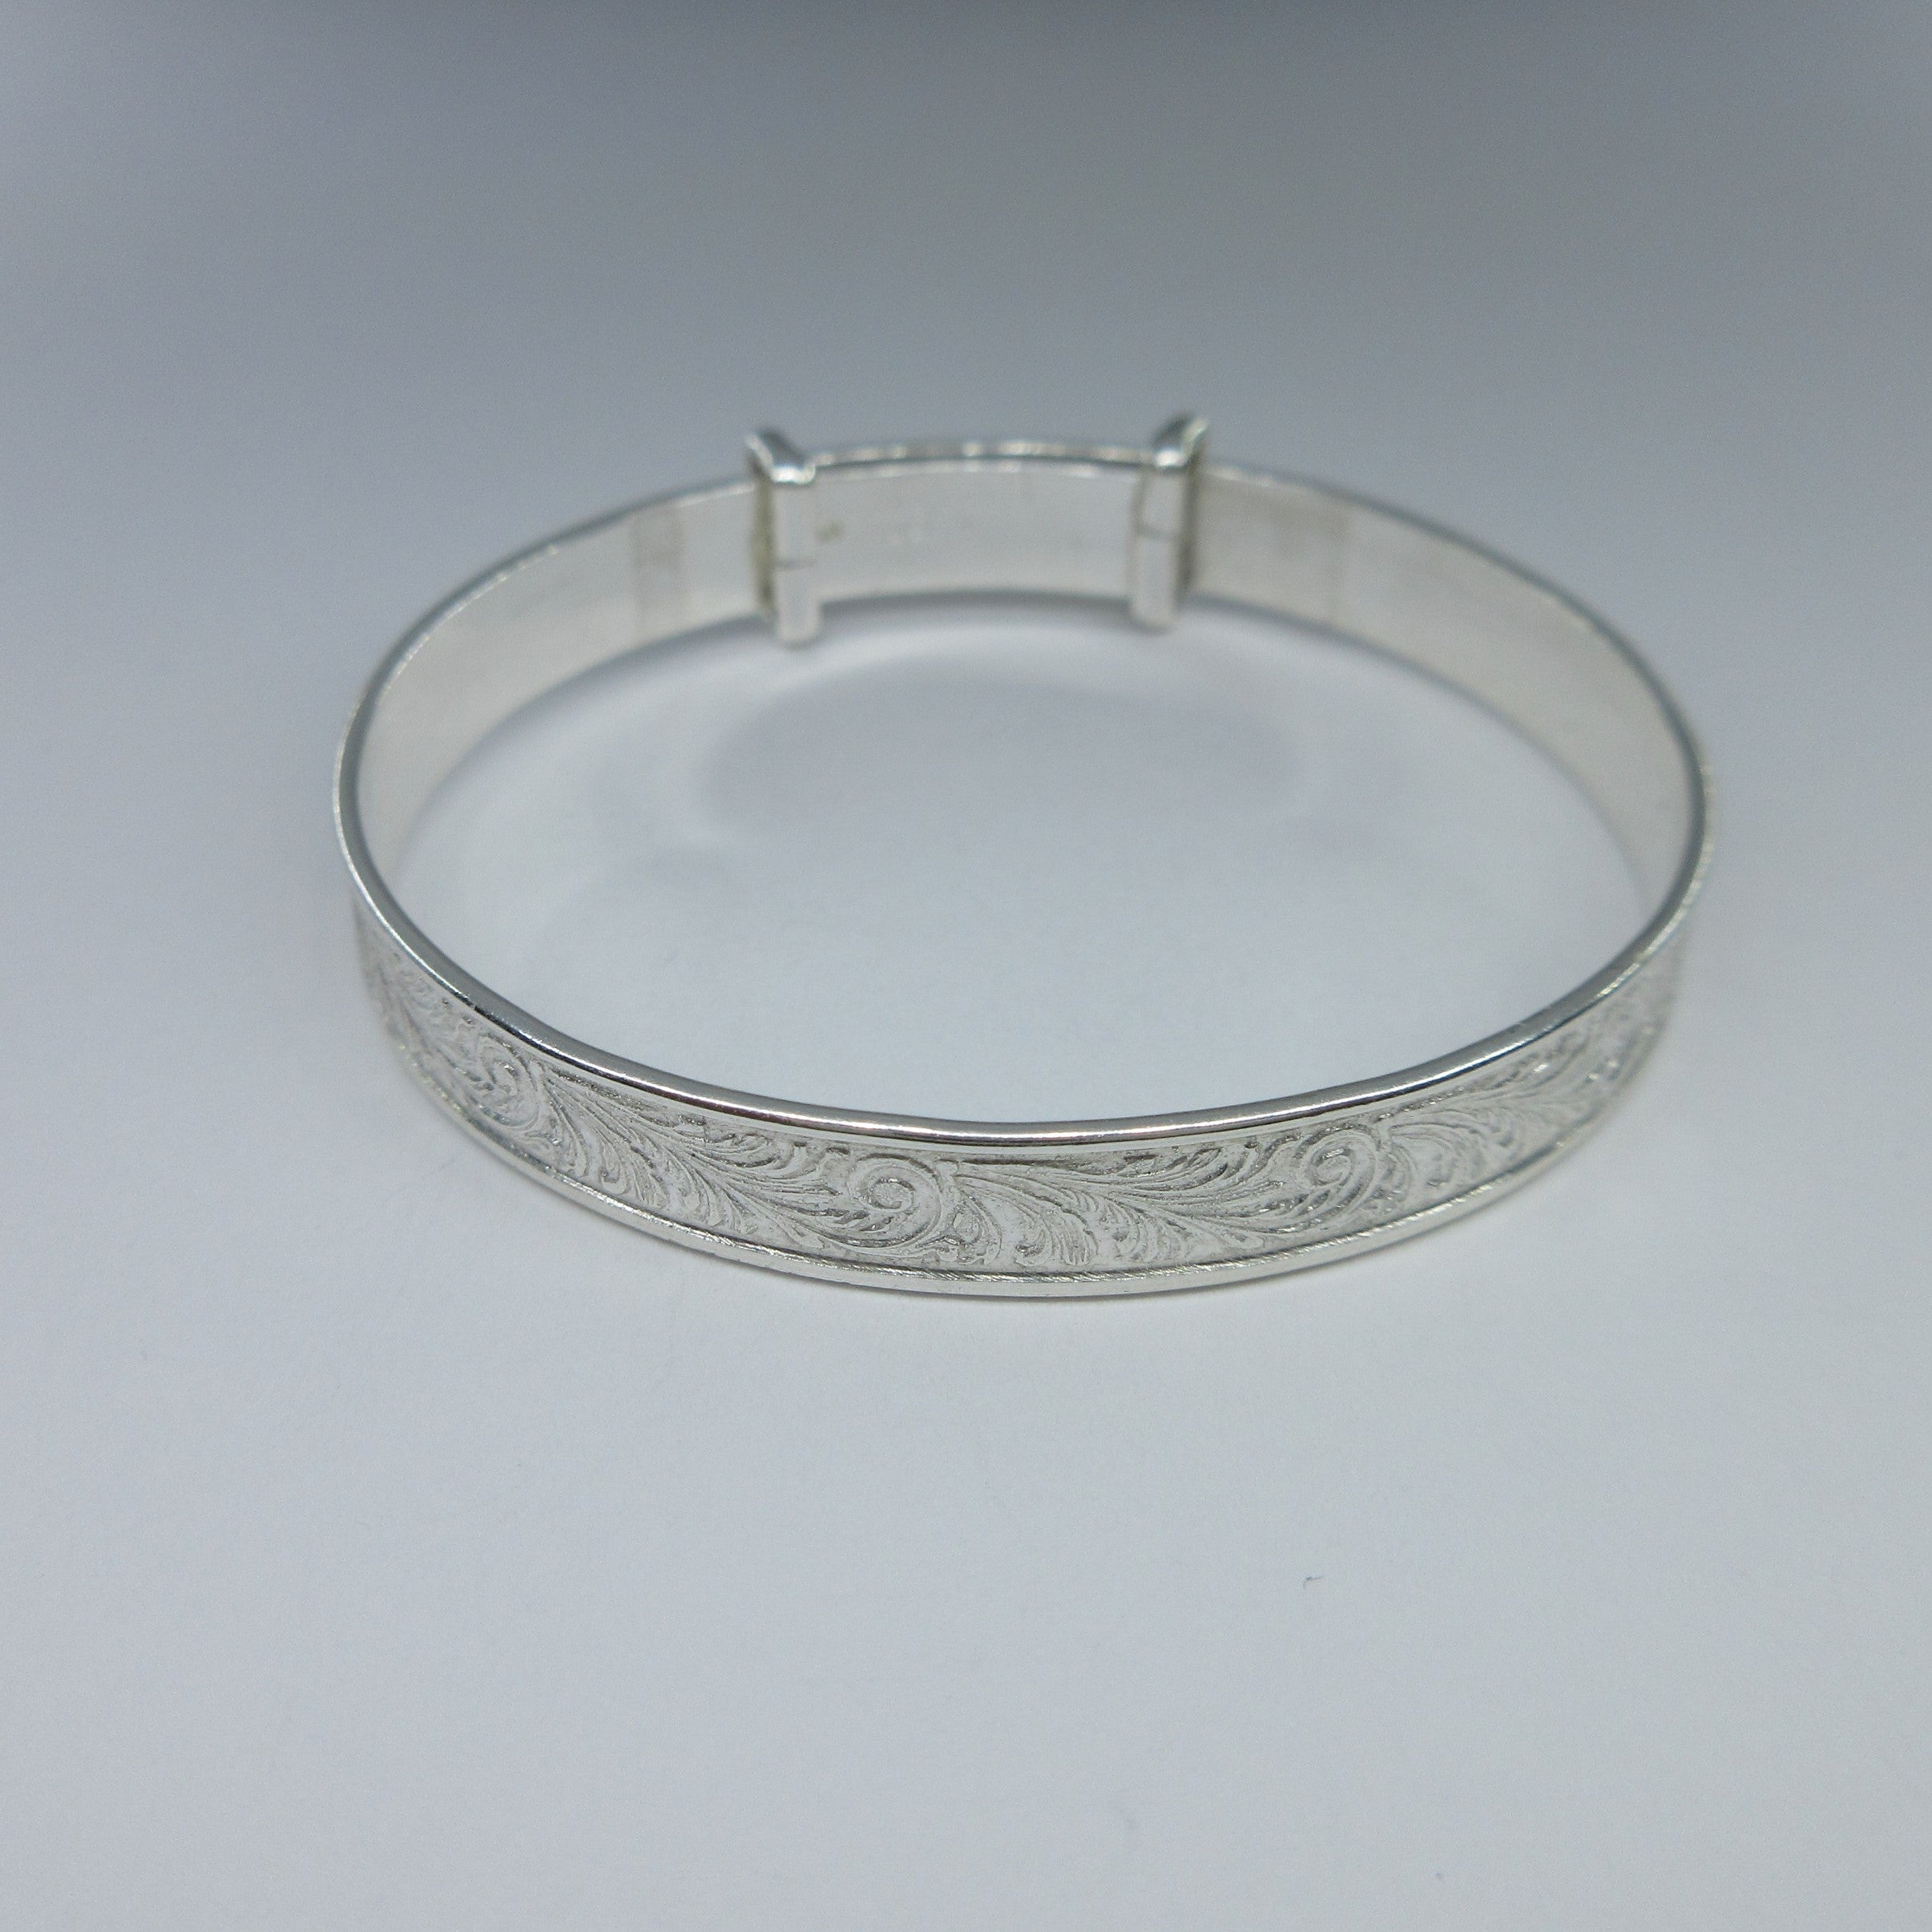 Babies/Childs Silver Patterned Expanding Bangle